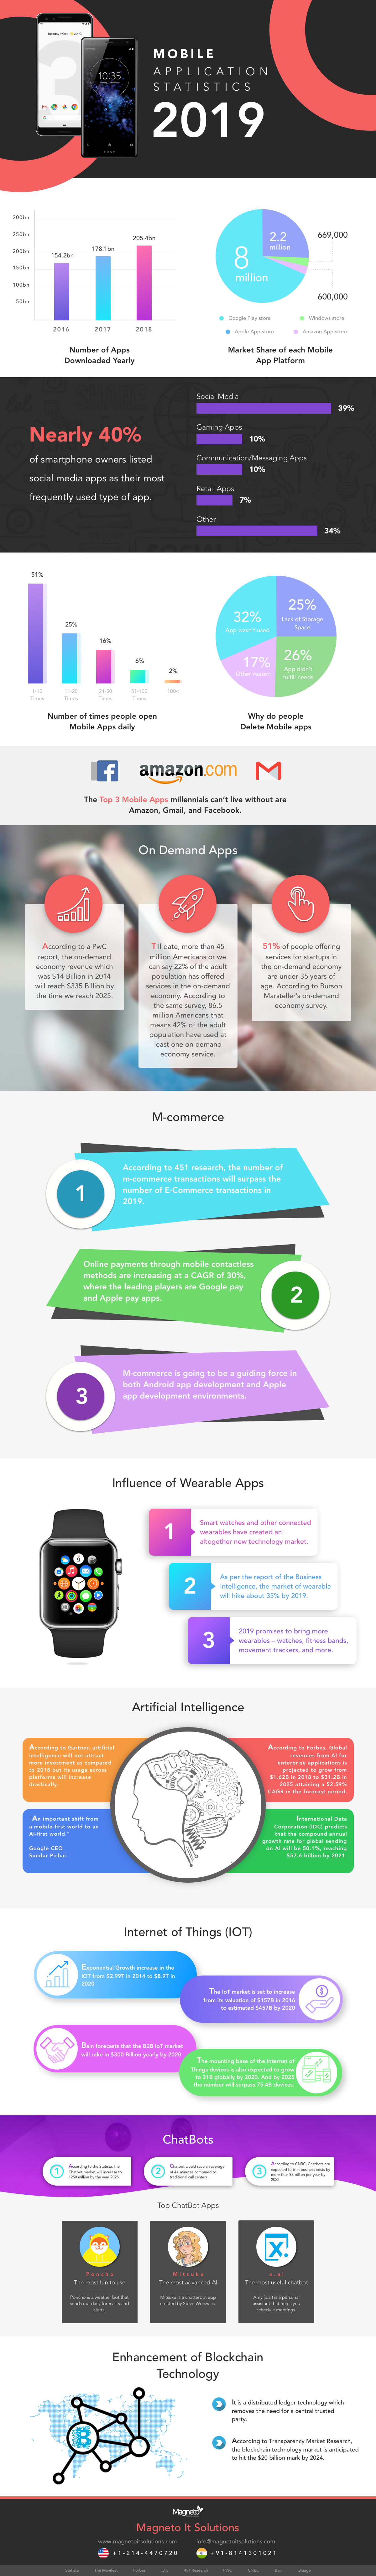 Mobile Commerce Infographic